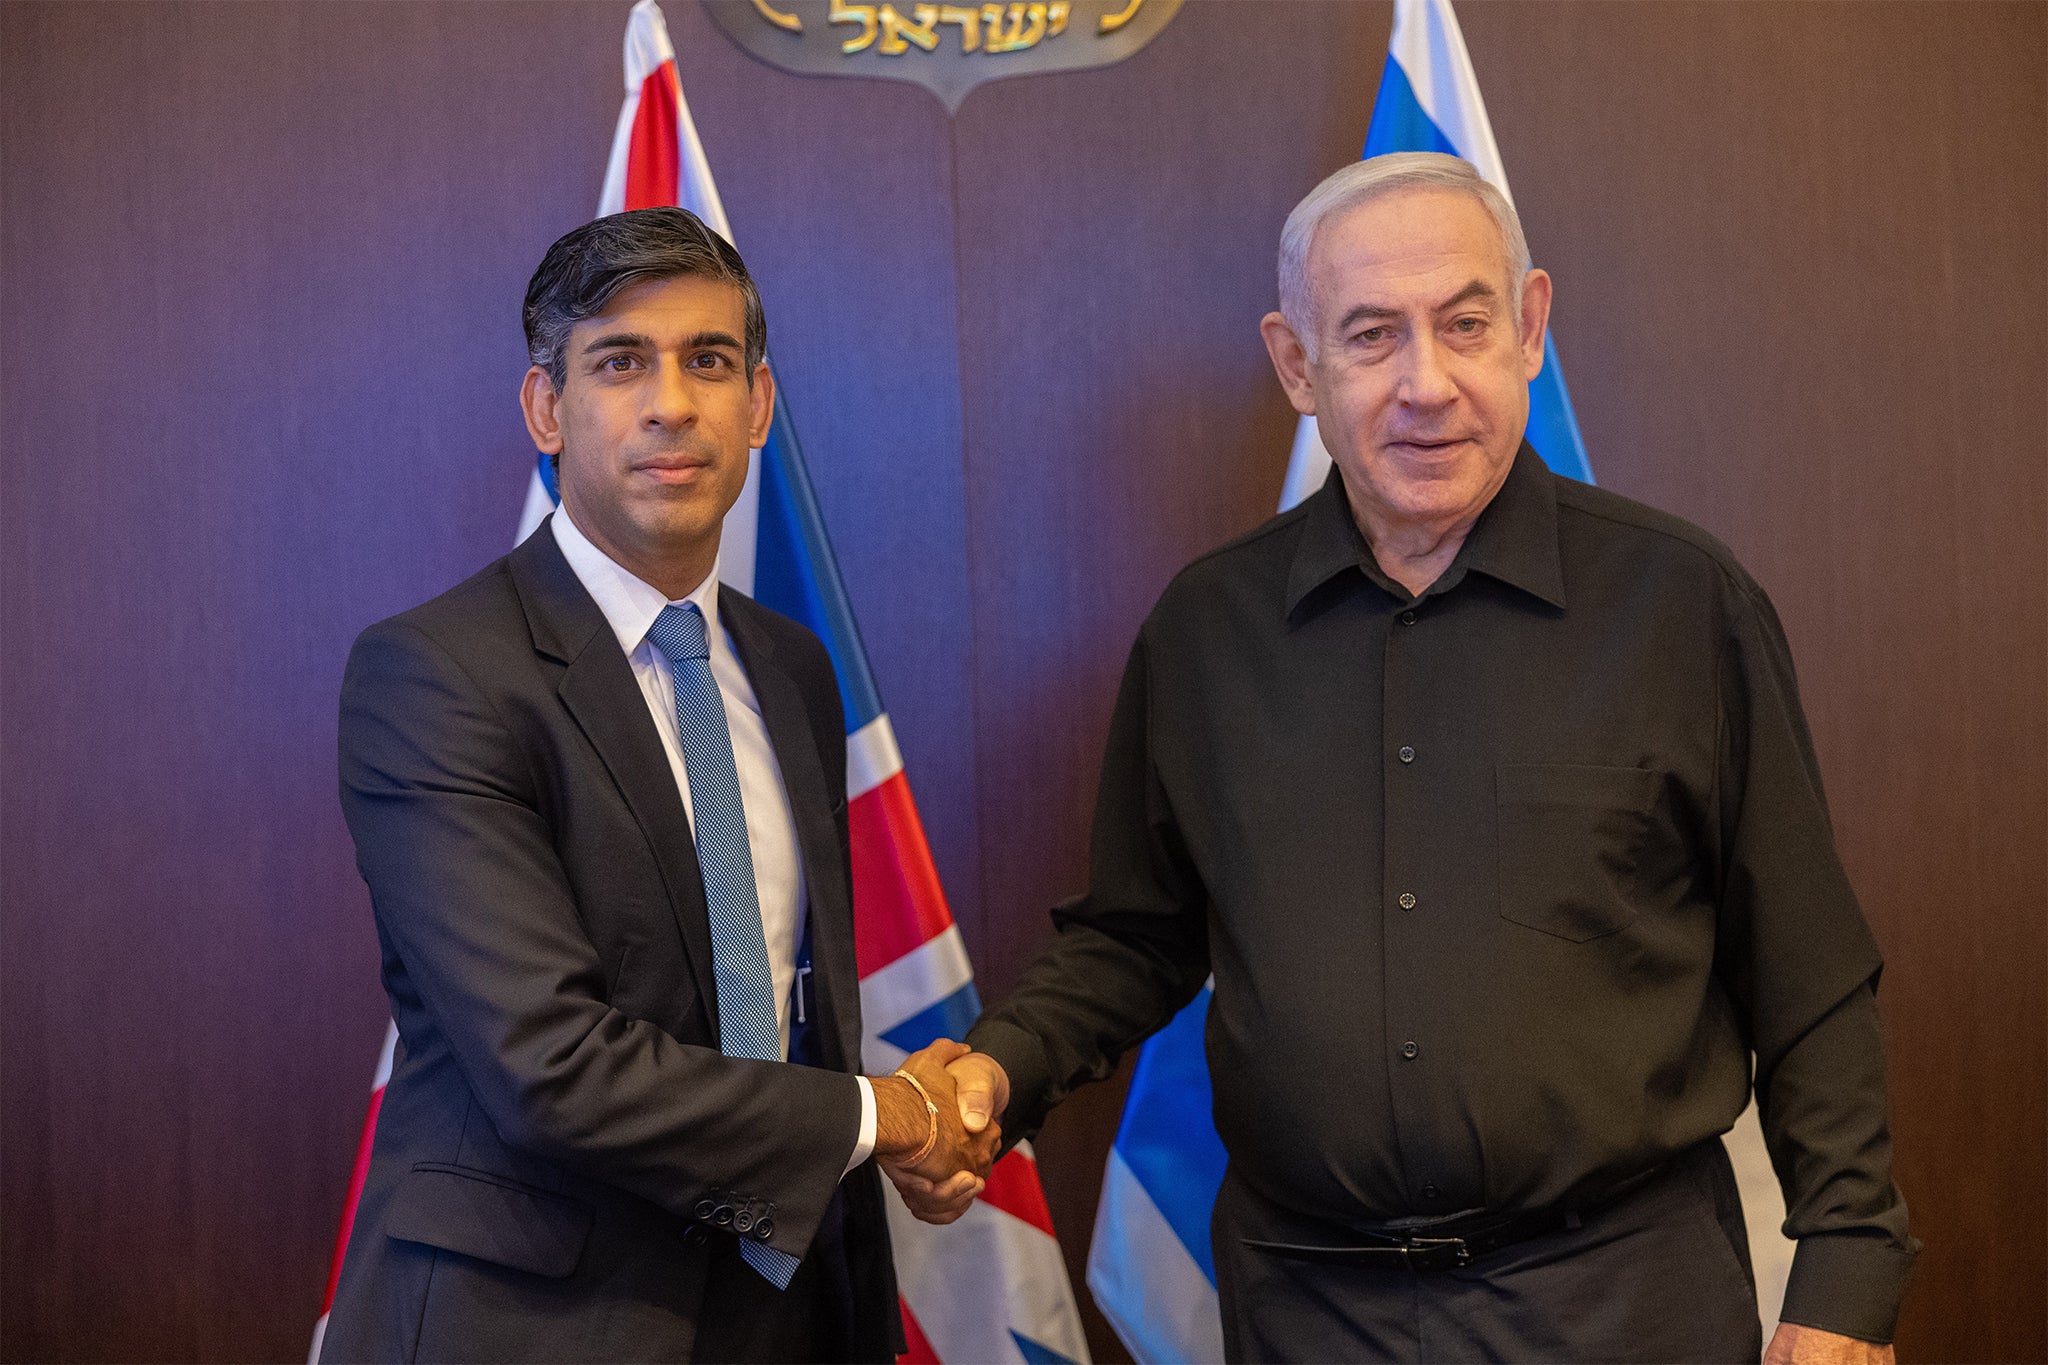 Sunak tells Netanyahu he supports military action to ‘restore security’